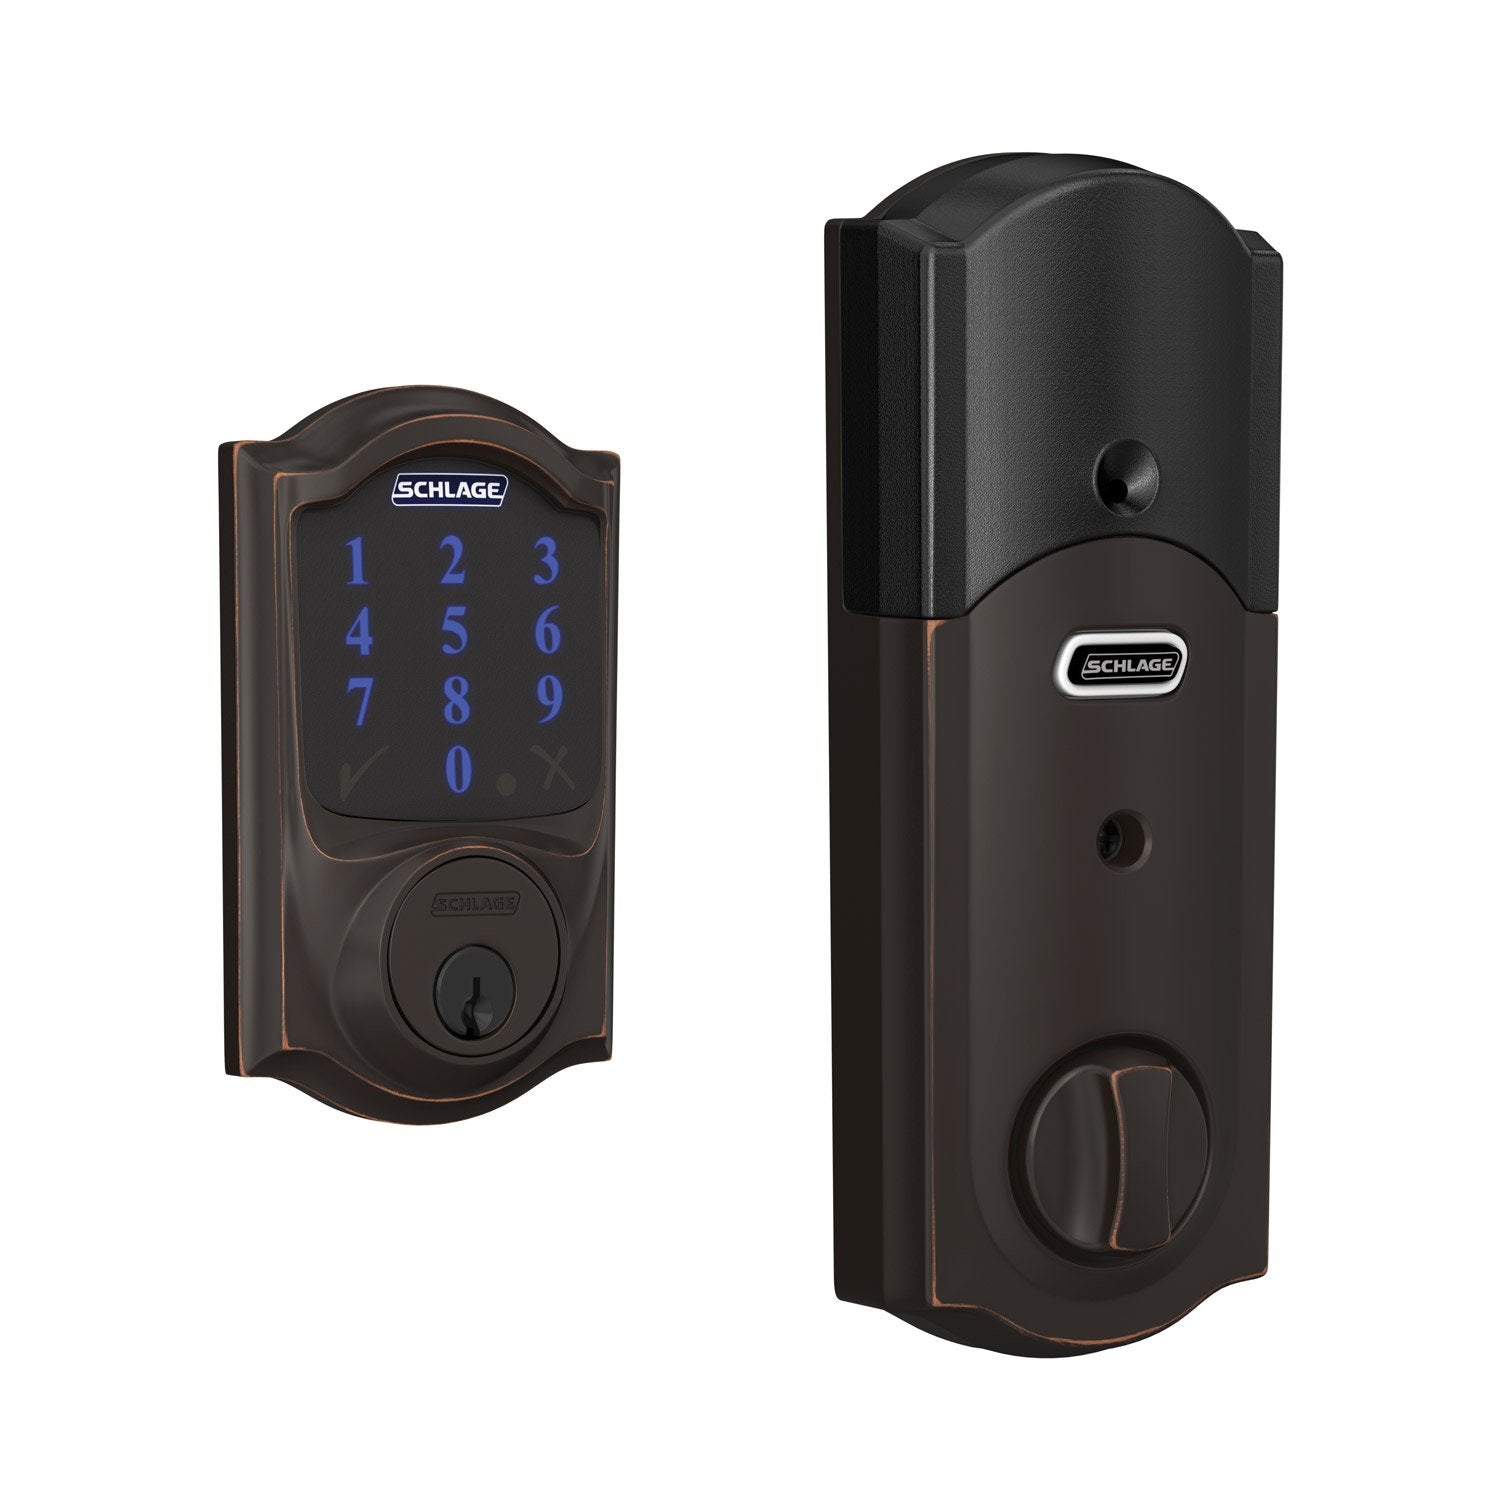 Schlage Connect Smart Deadbolt, Z-Wave Plus Enabled (for Works with Ring Alarm Security System) - Aged Bronze